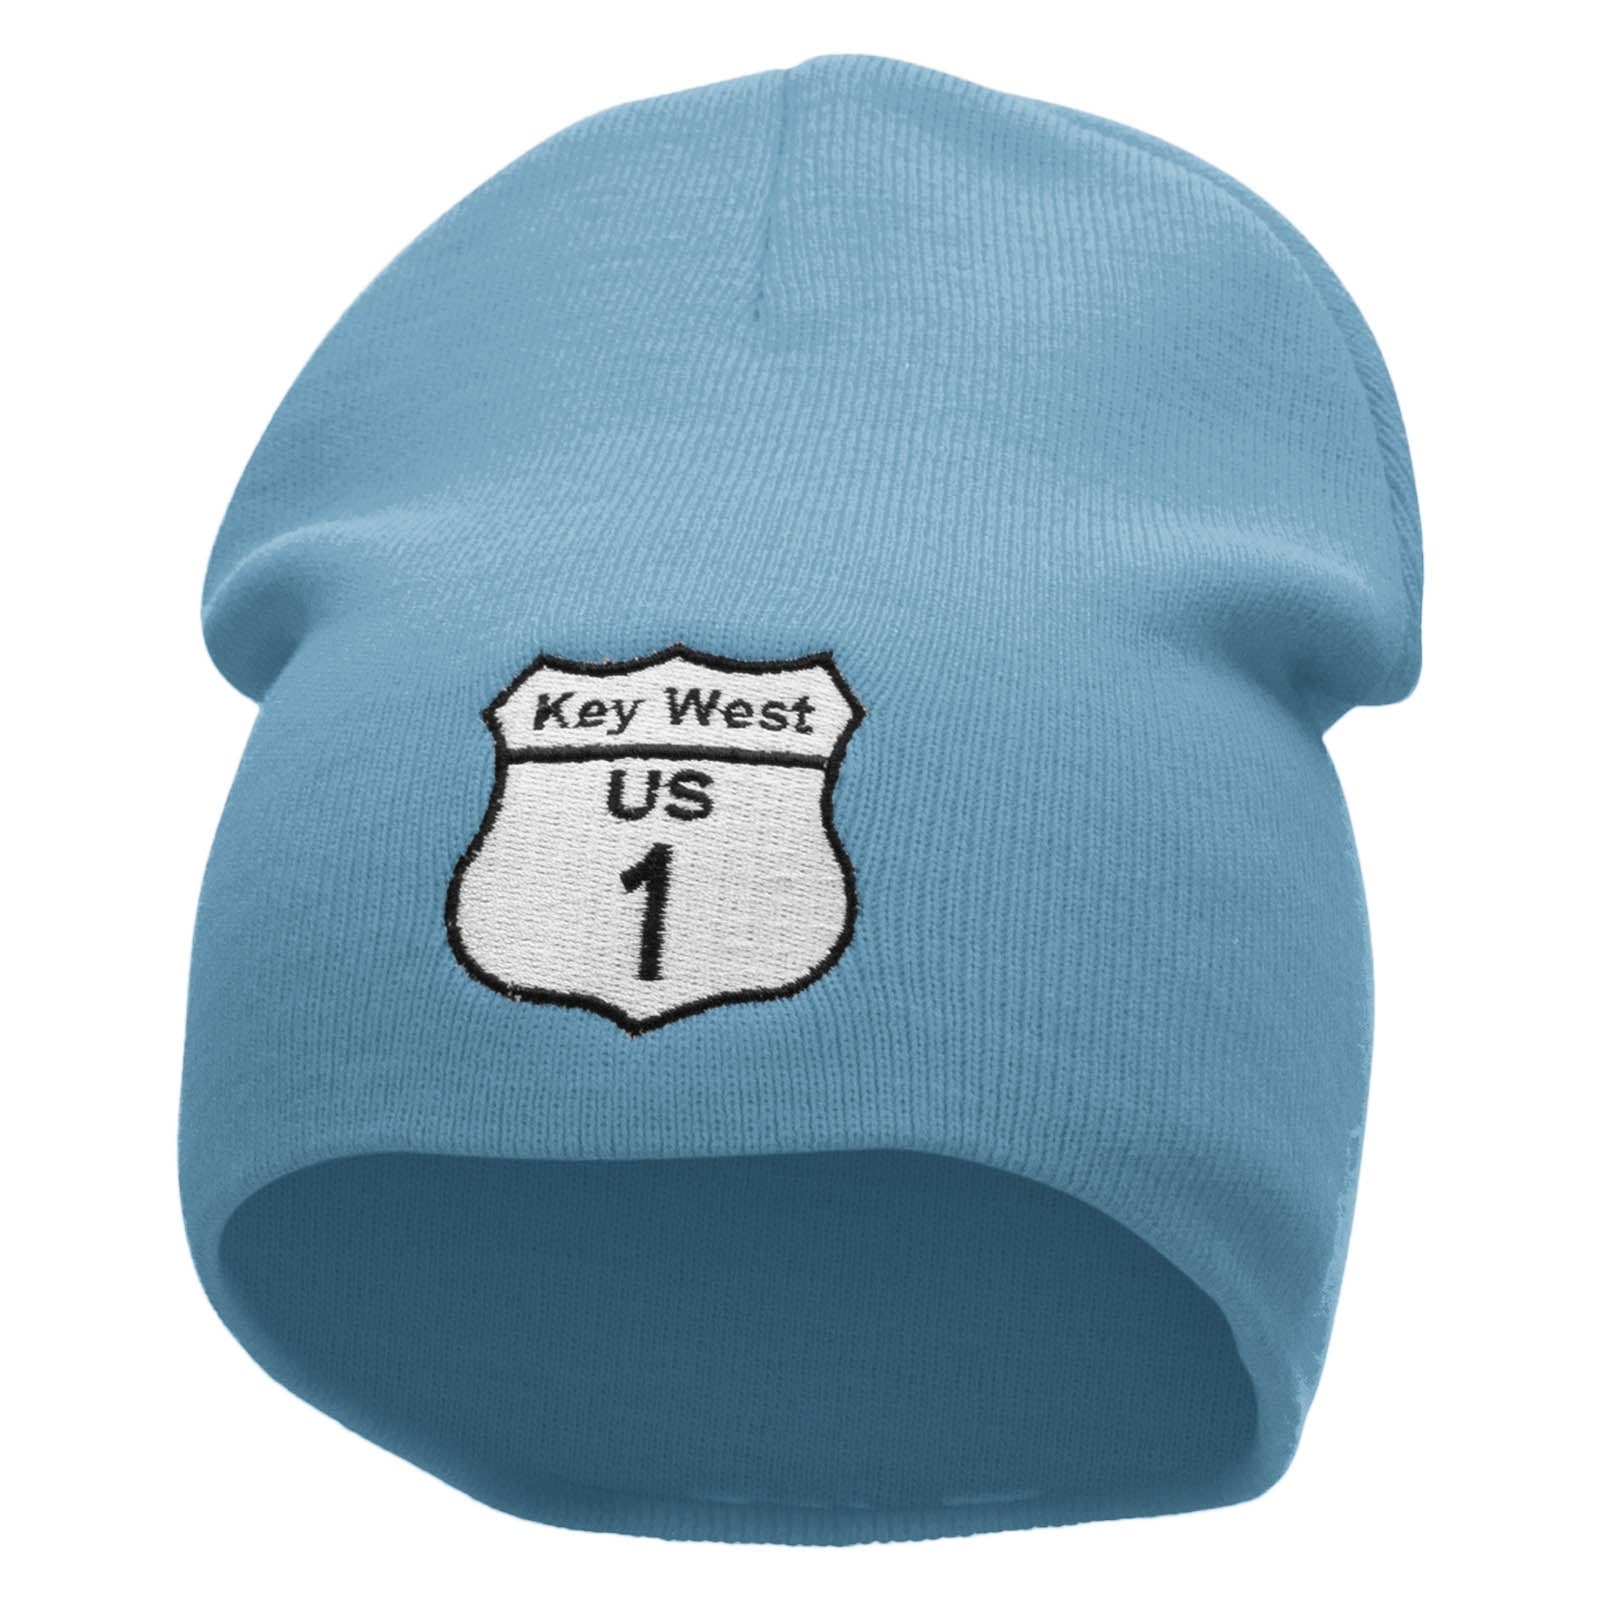 Route Key West 1 Sign Embroidered 8 Inch Short Beanie - Lt Blue OSFM